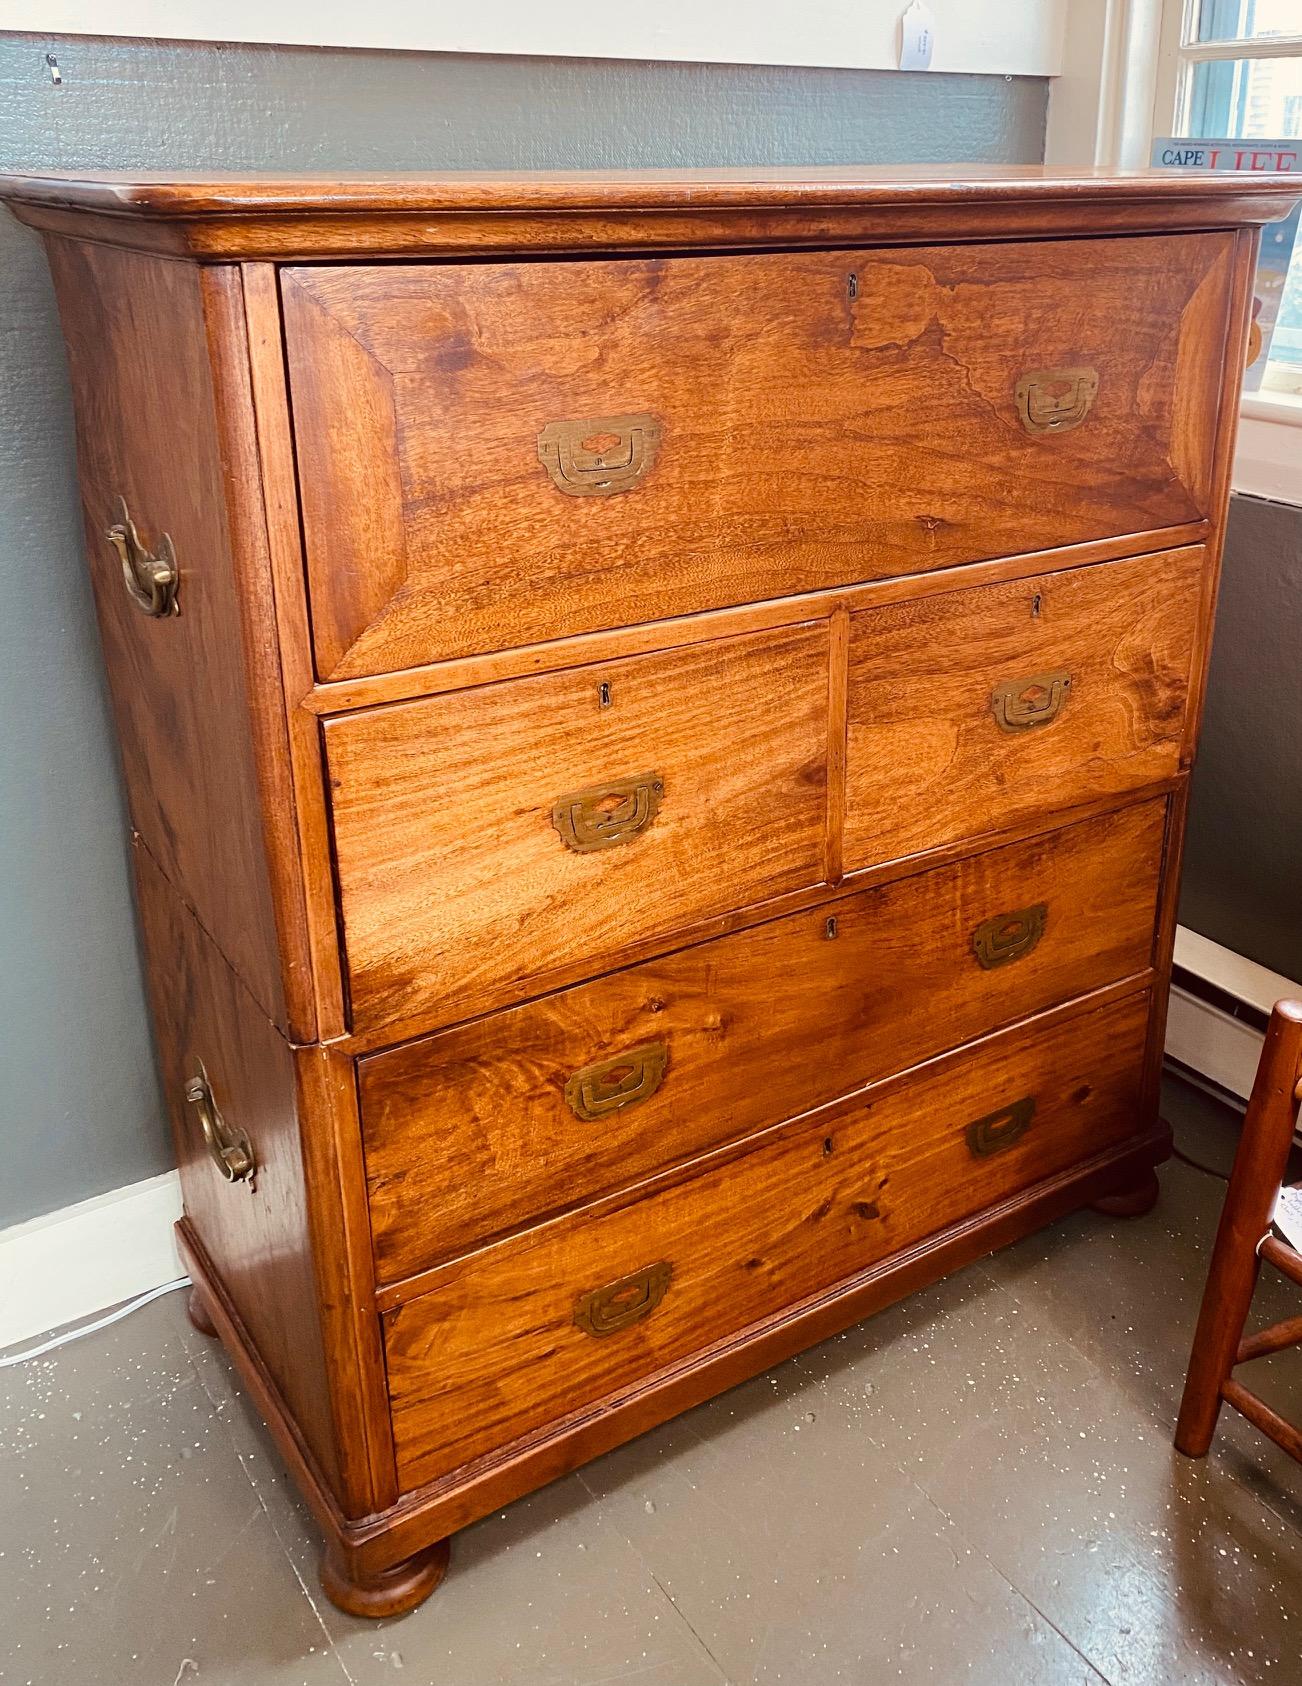 Antique Camphor wood campaign chest with fitted desk drawer, most likely British, Mid 19th Century, a high quality campaign piece made in two pieces from beautiful camphor wood, light and bright and well maintained with a natural glossy finish. The